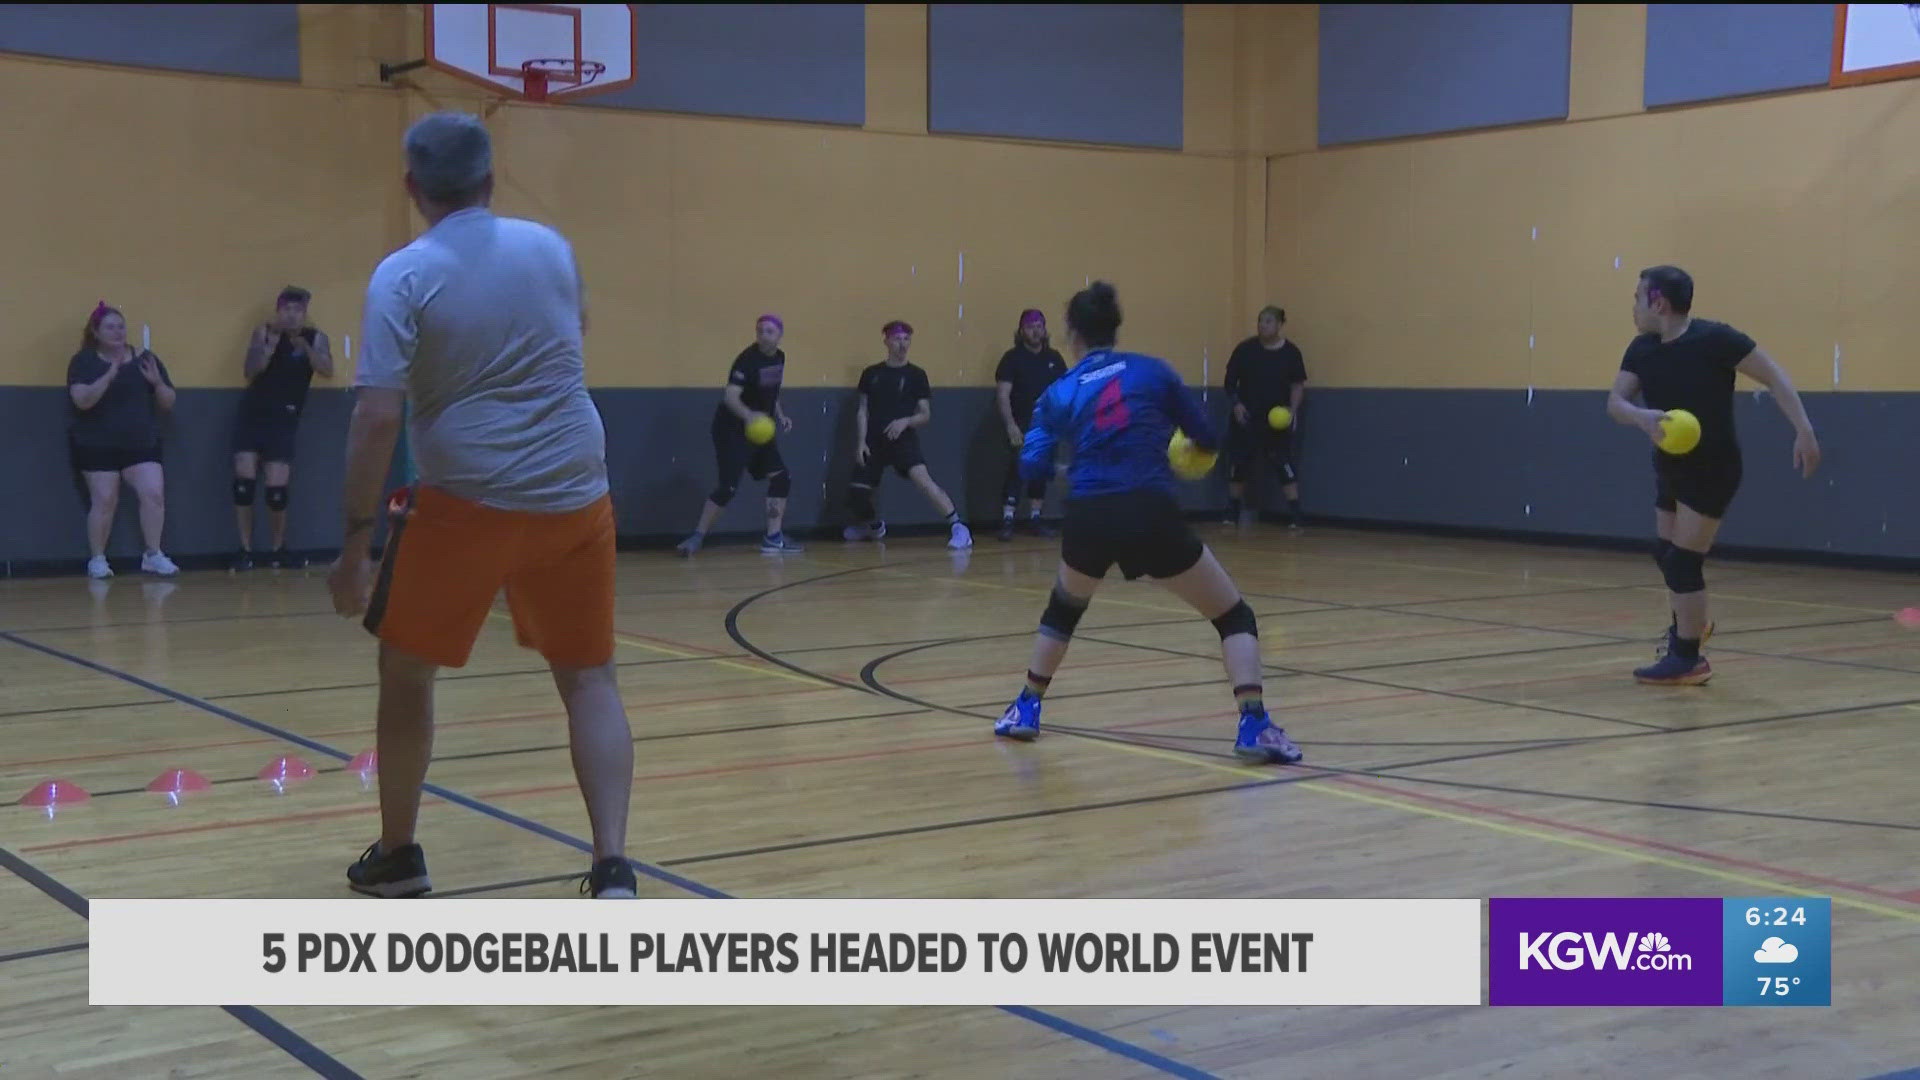 The team is headed to Austria for the dodgeball world championships. The players say they hope to see dodgeball one day become an Olympic sport.